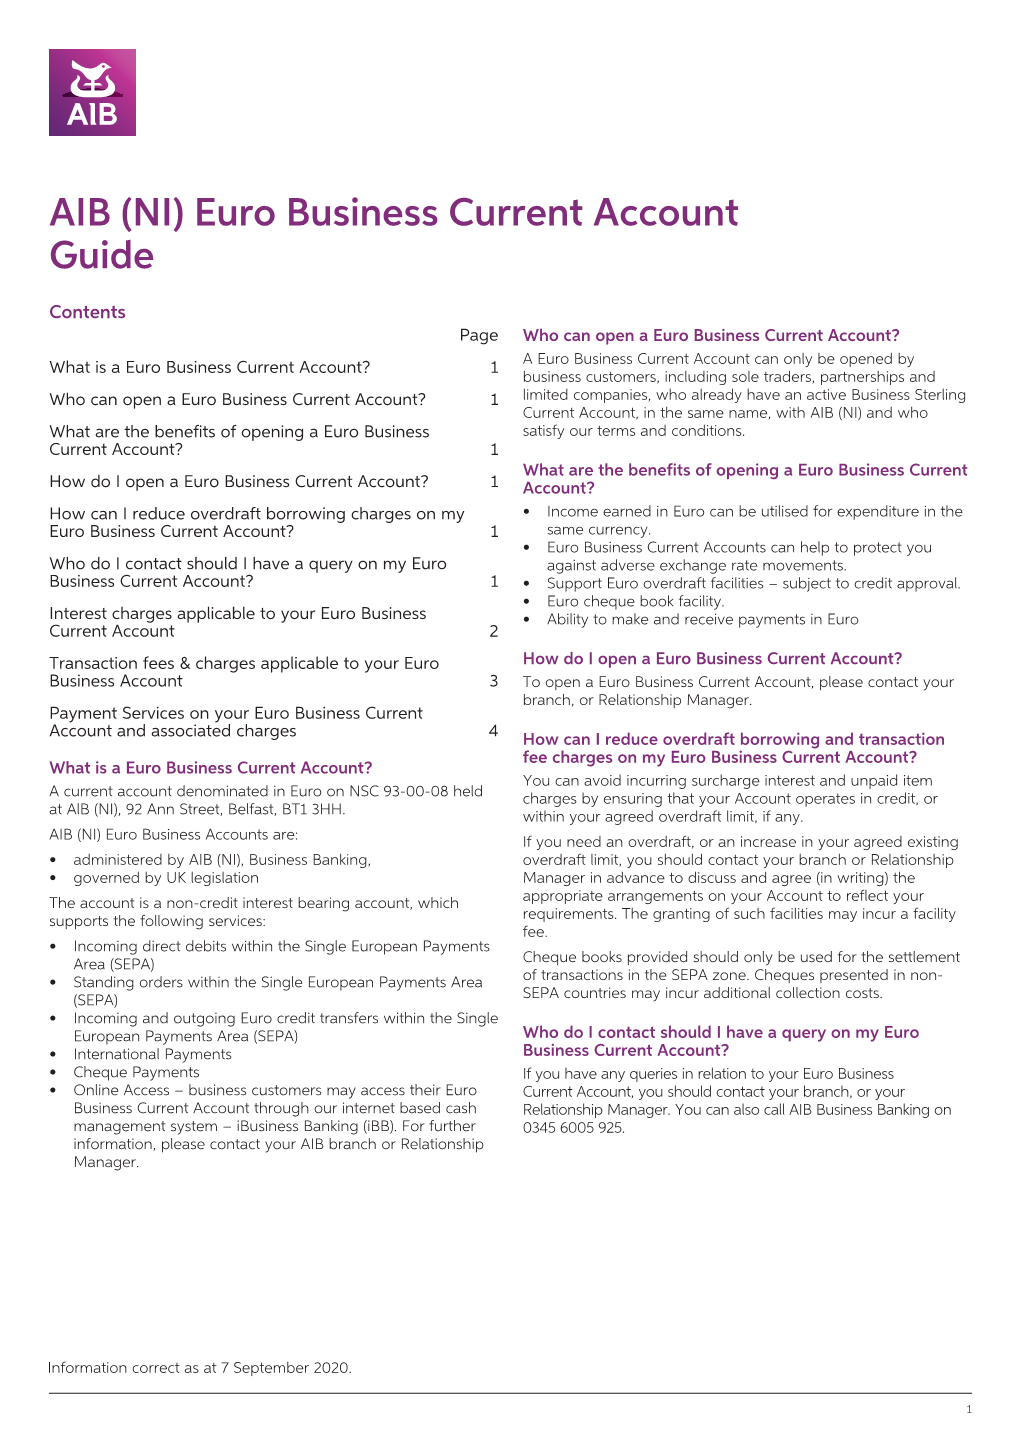 AIB (NI) Euro Business Current Account Guide